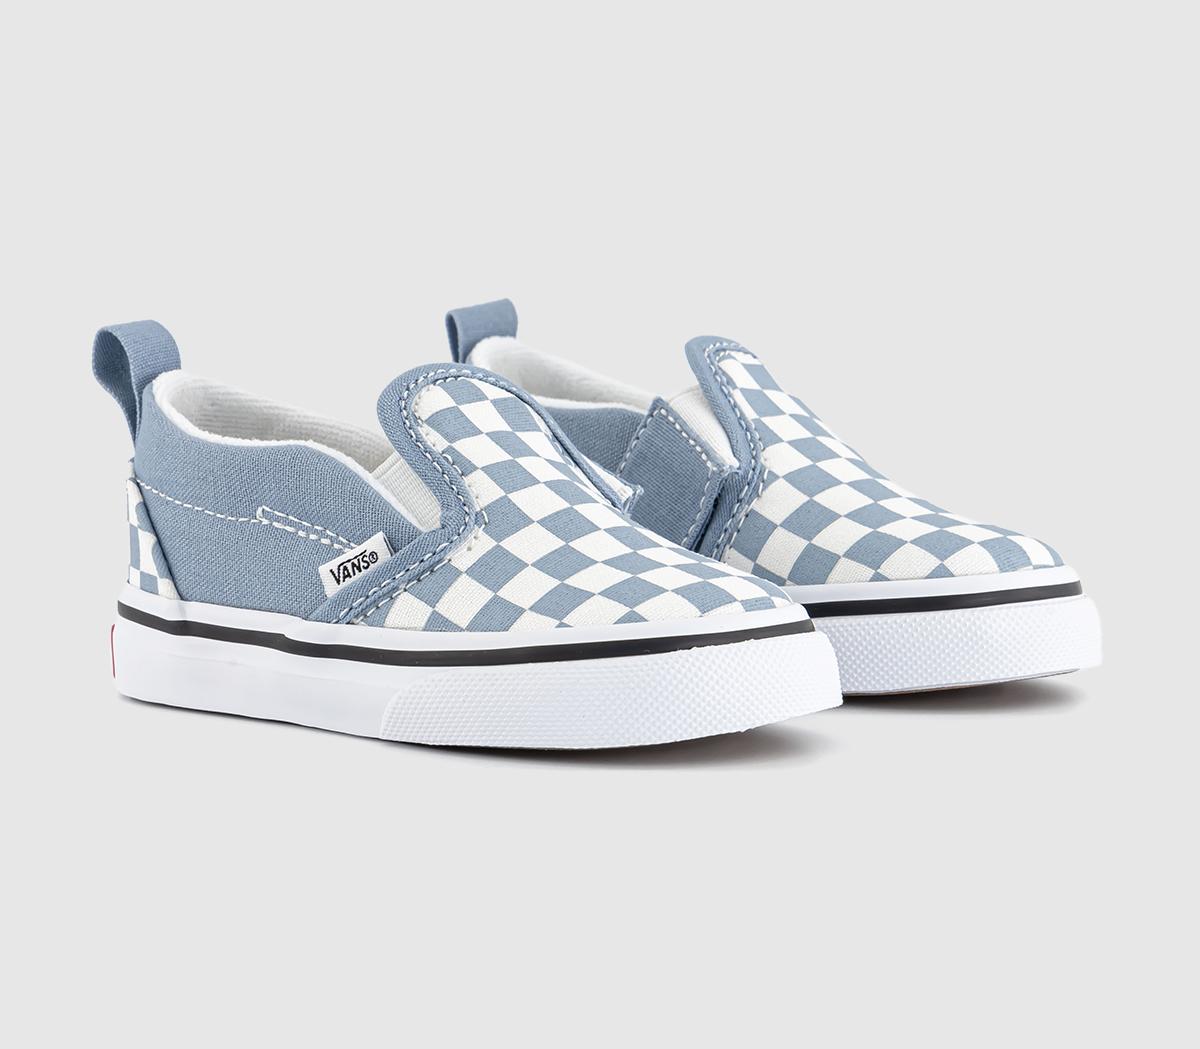 Vans Kids Classic Slip On Toddler Trainers Color Theory Checkerboard Dusty Blue, 7infant